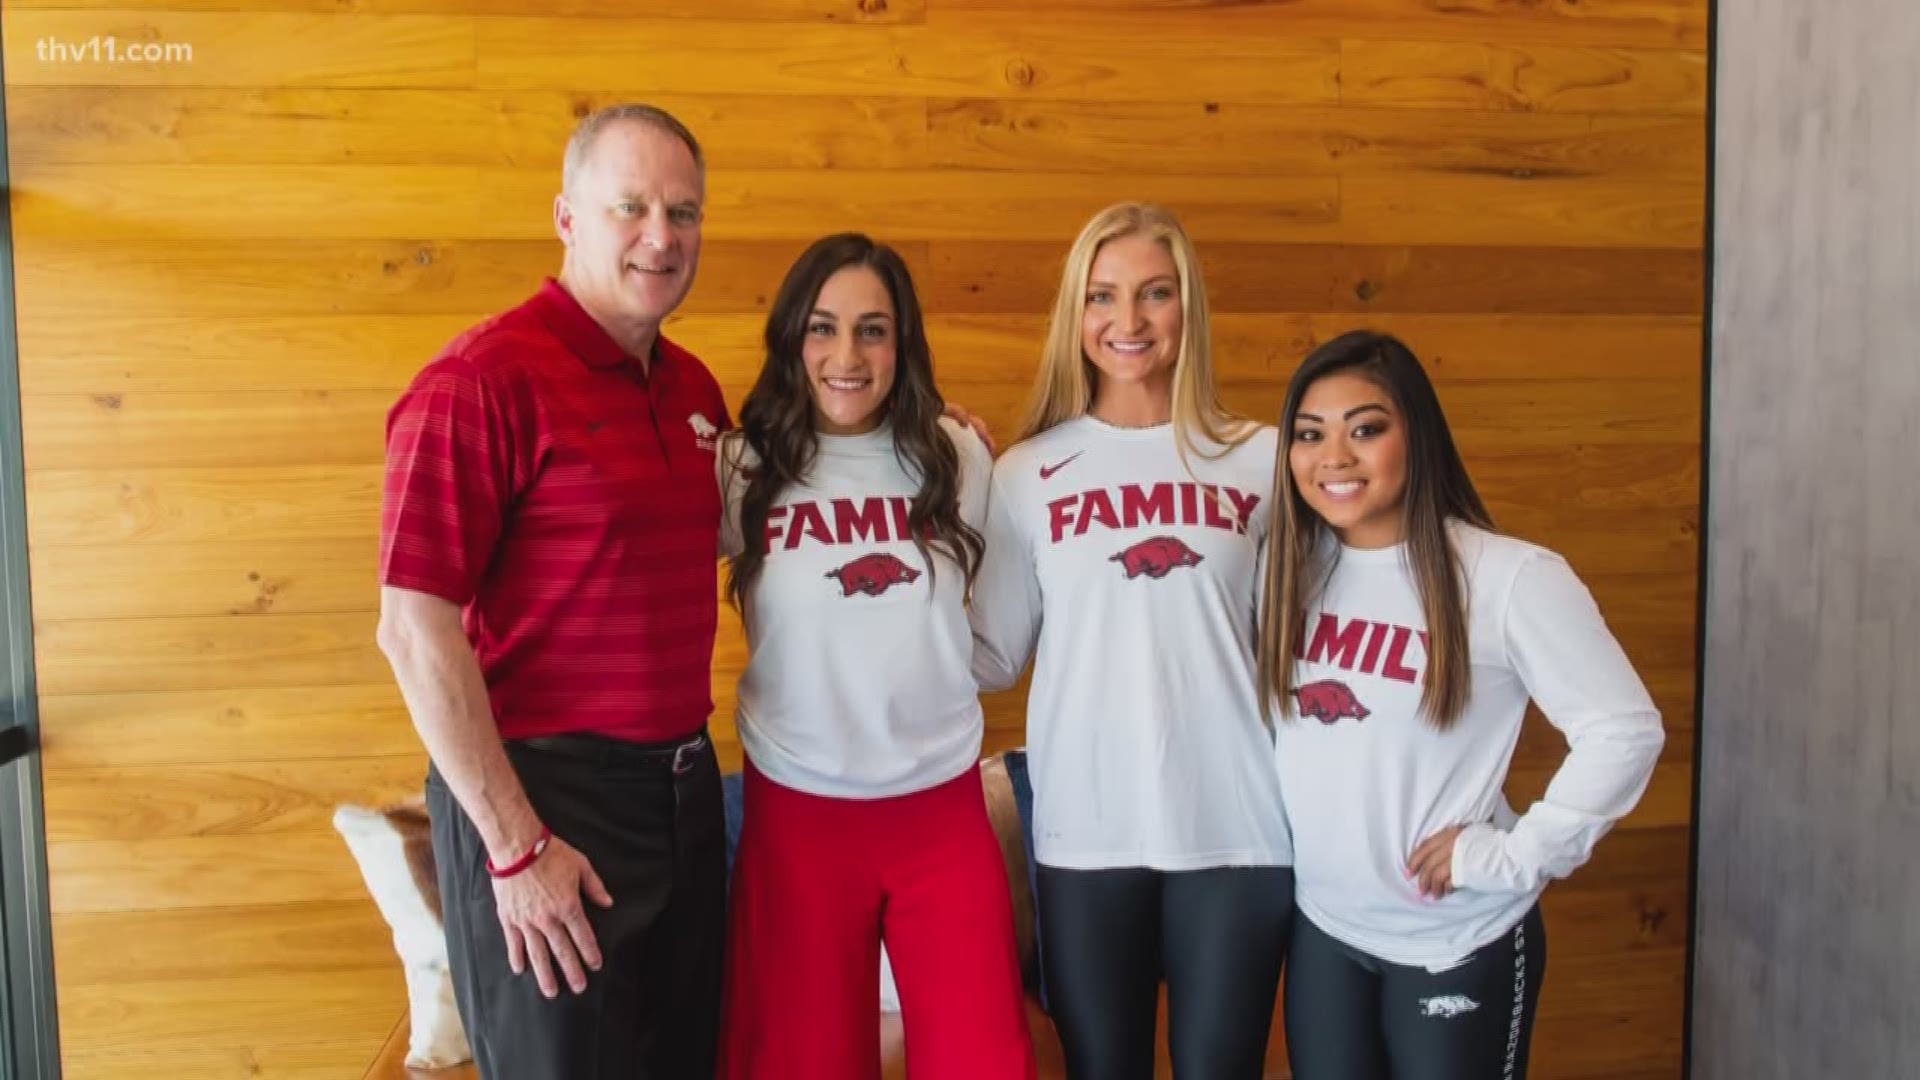 Olympic gold medalist looking to take Arkansas gymnastics team to the